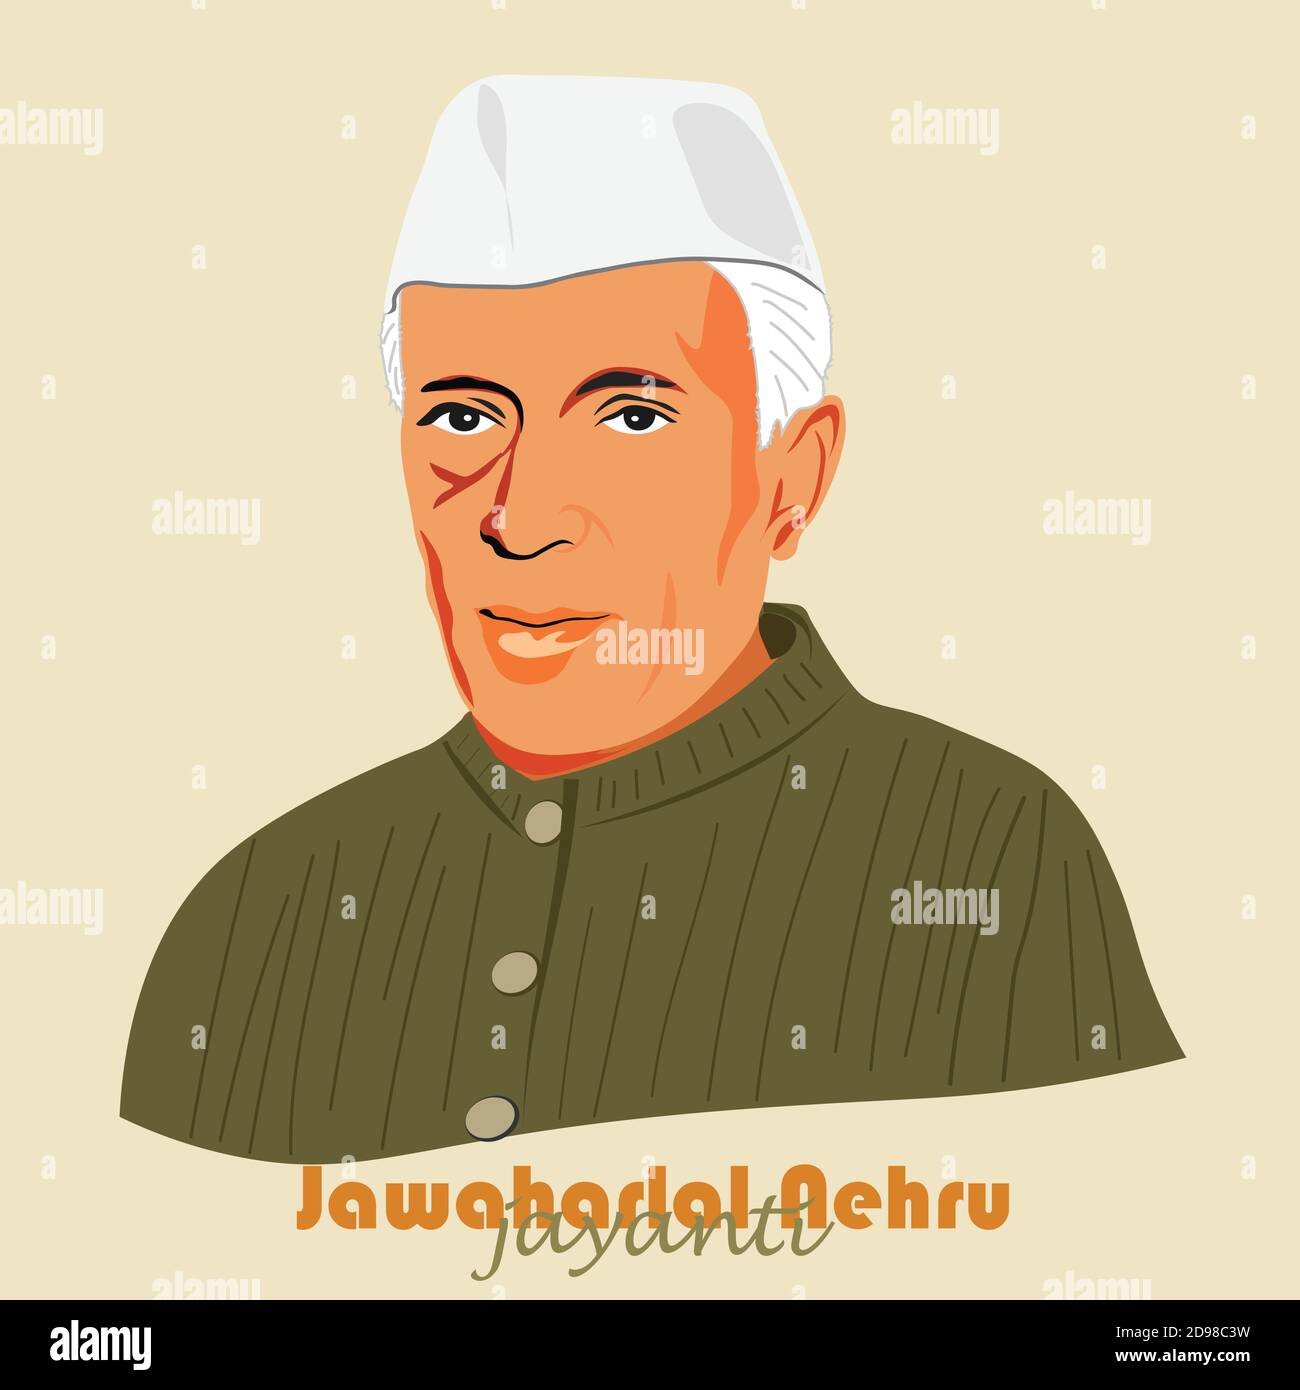 How to Draw Pandit Jawaharlal Nehru / Childrens Day Greeting Step by step  Drawing - YouTube